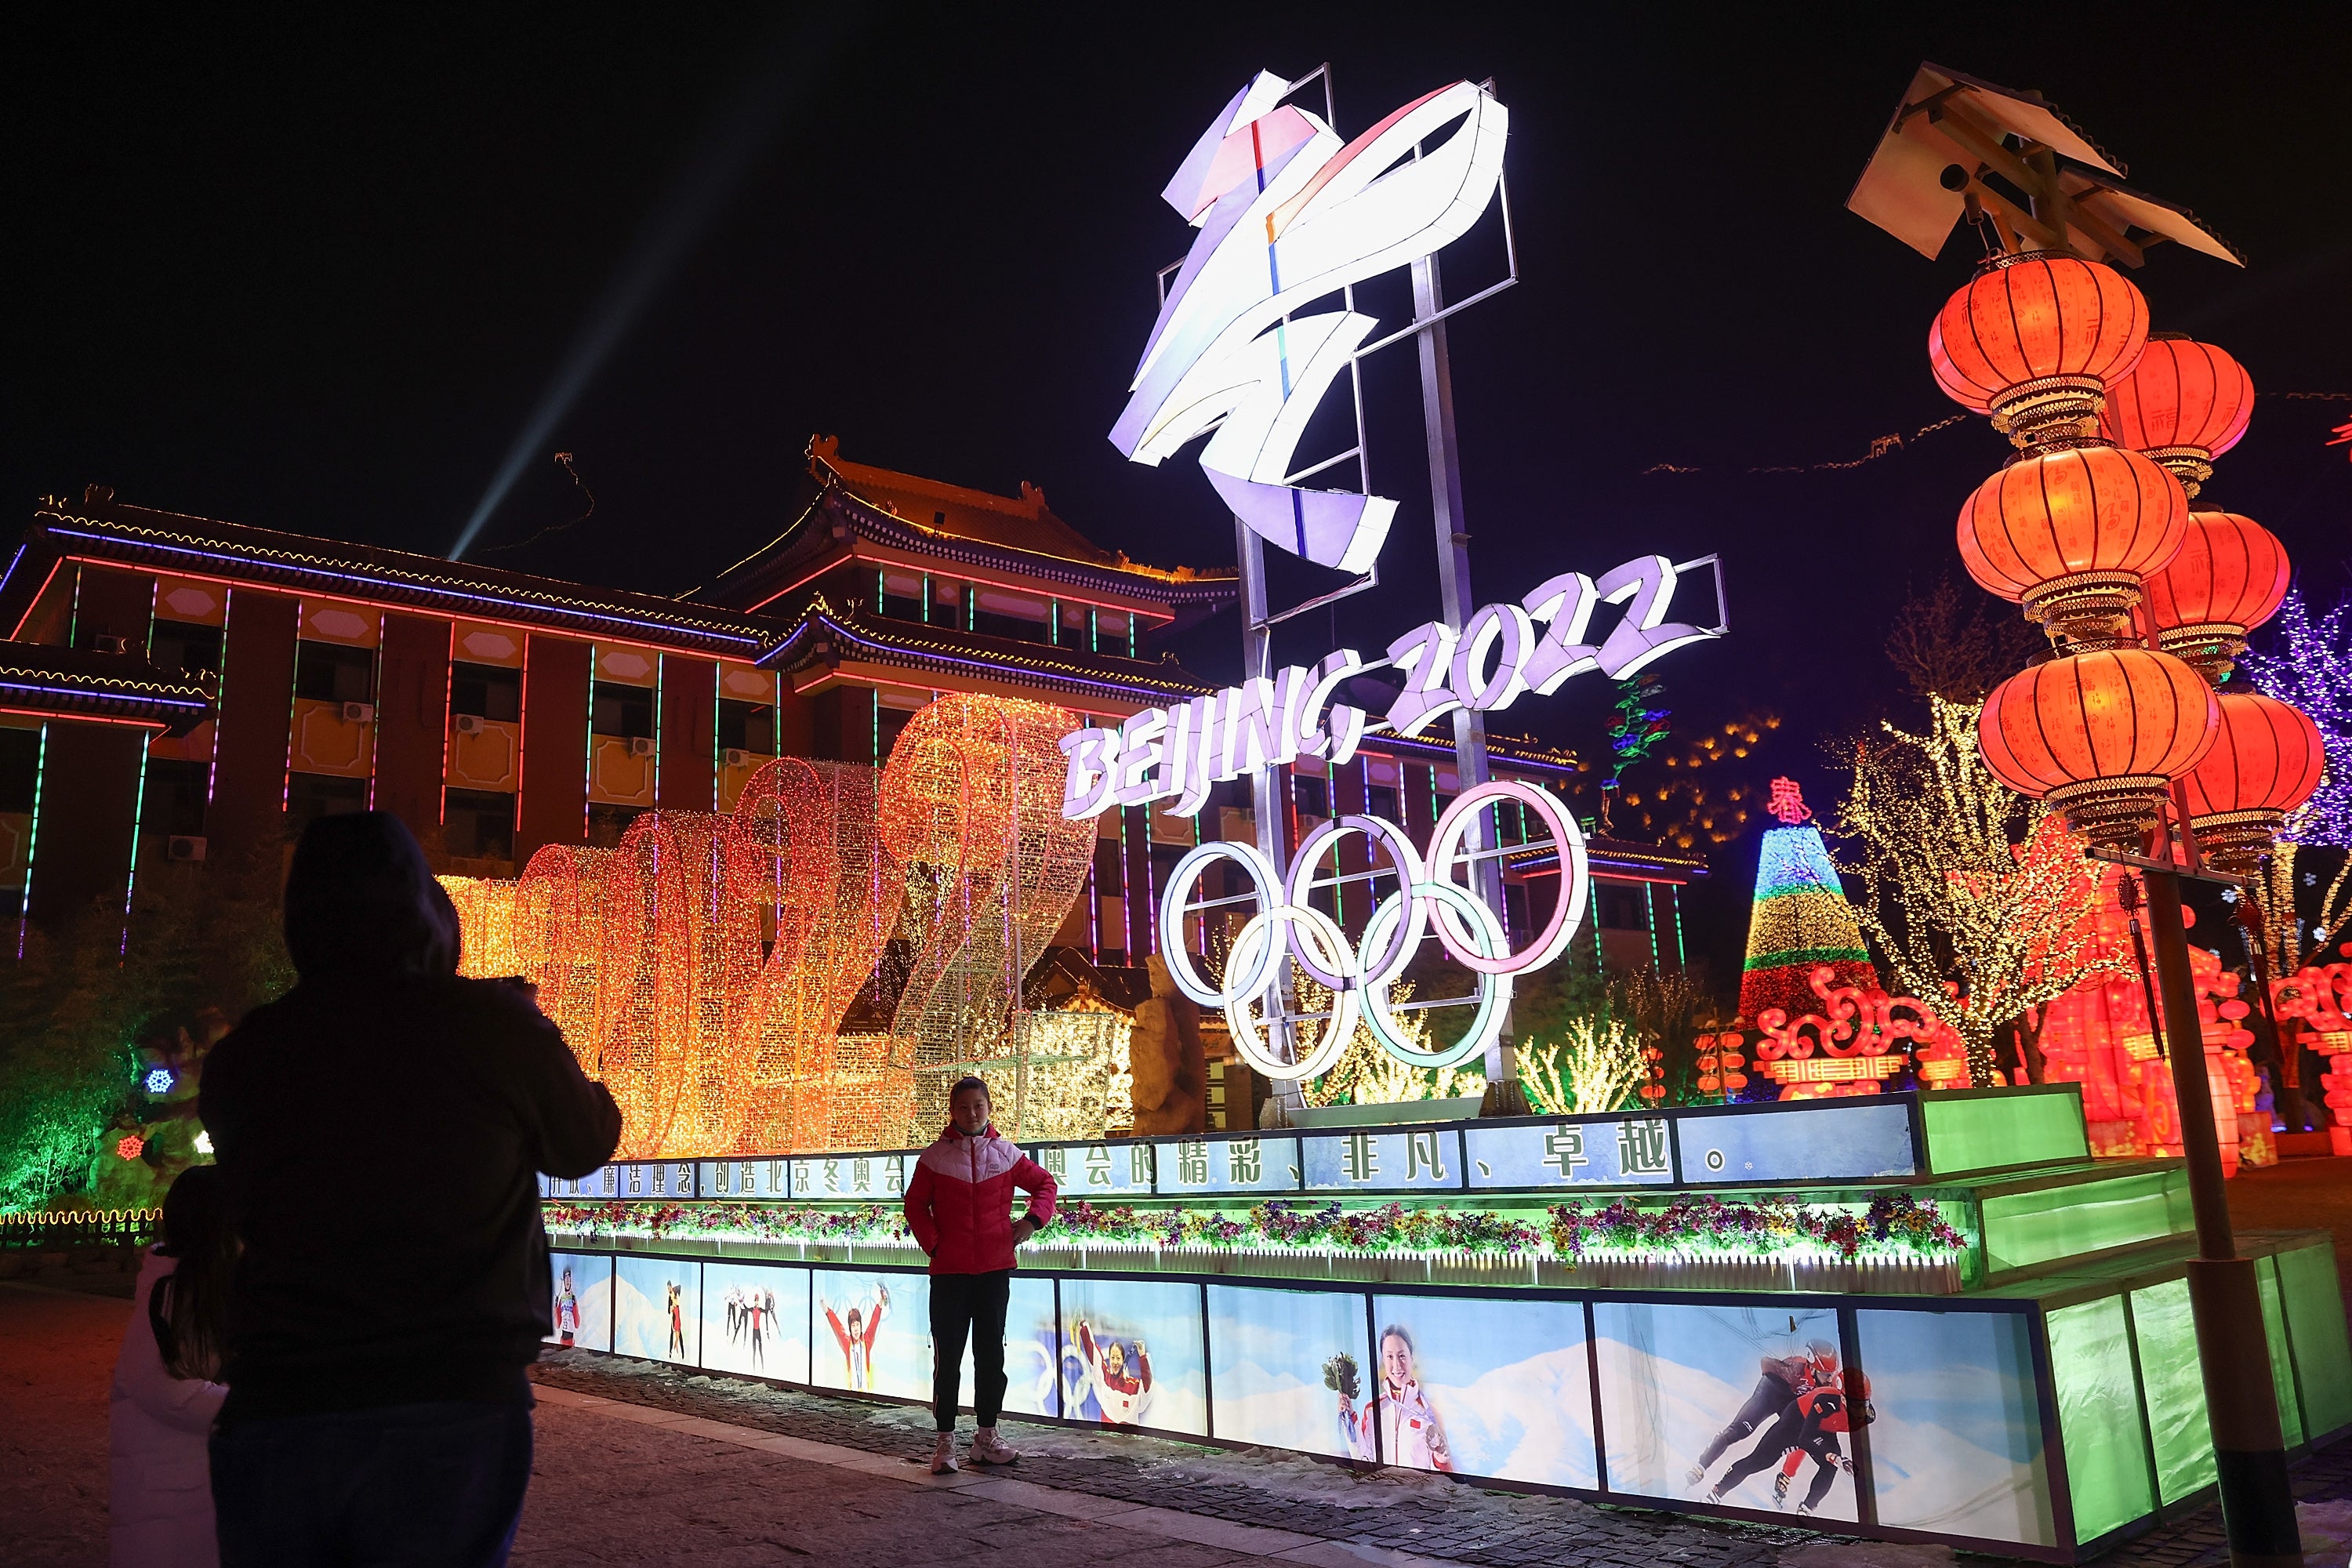 US had previously announced a diplomatic boycott of 2022 games